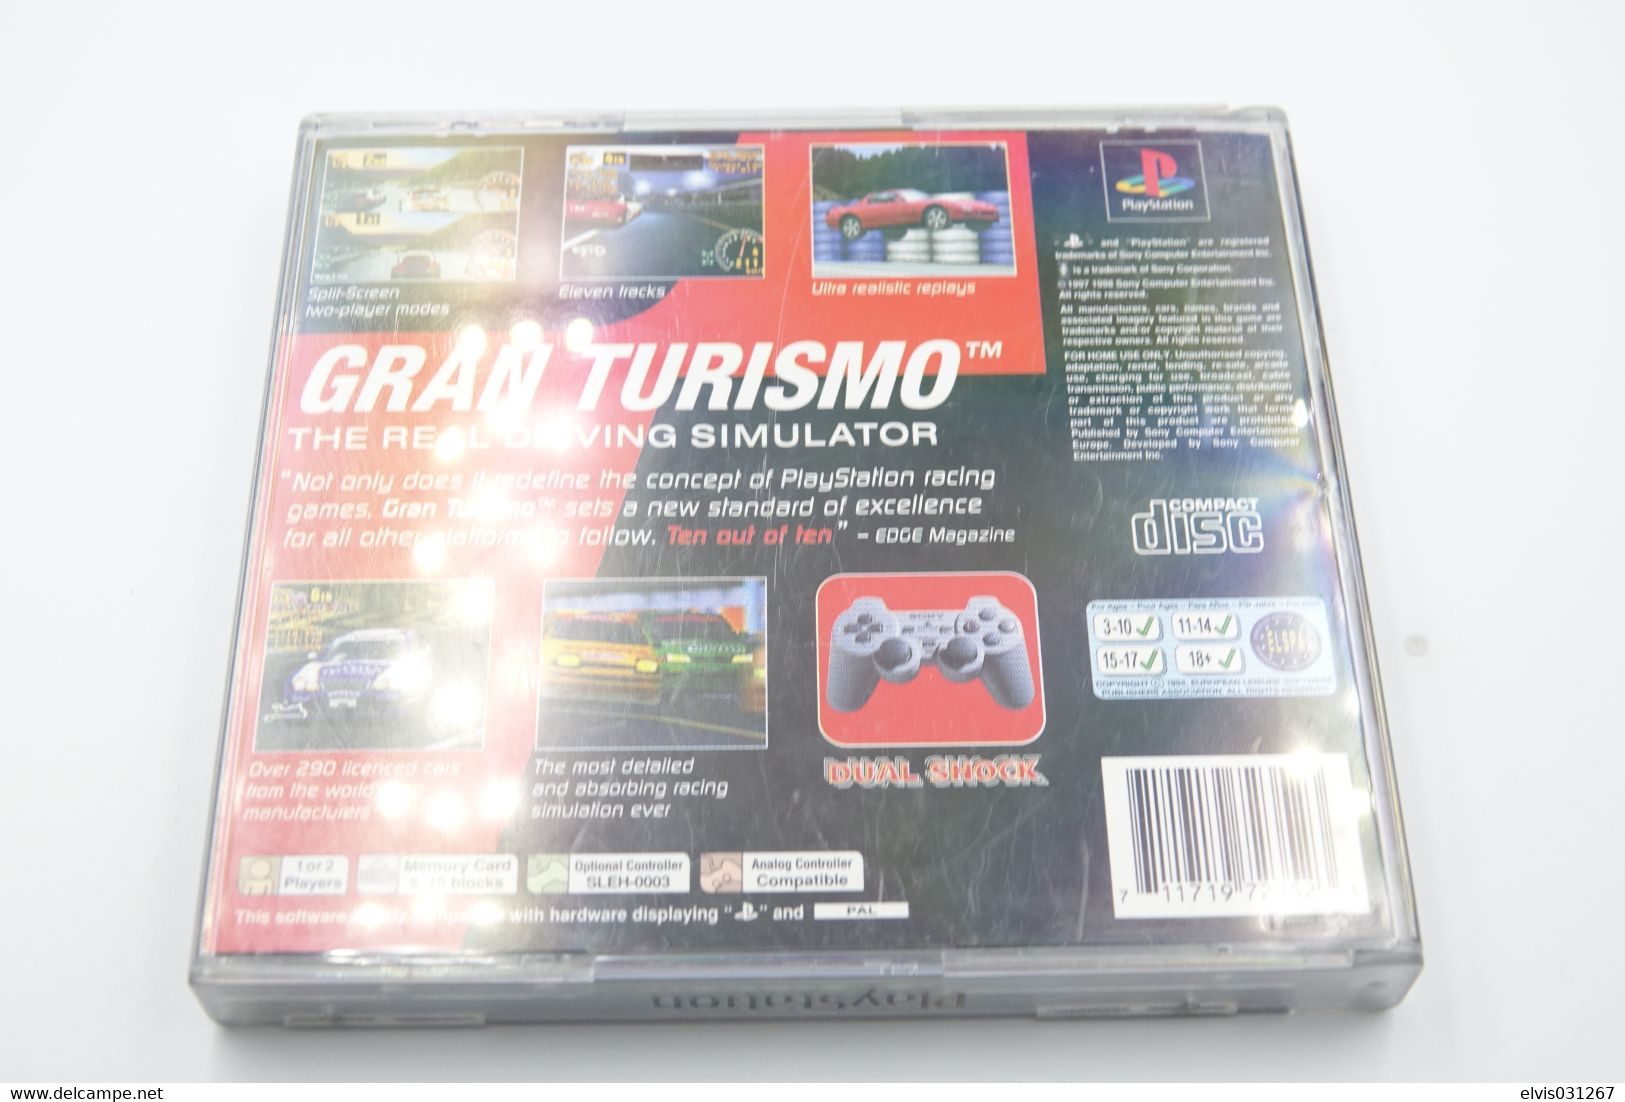 SONY PLAYSTATION ONE PS1 : GRAN TURISMO 1 THE REAL DRIVING SIMULATOR - Playstation